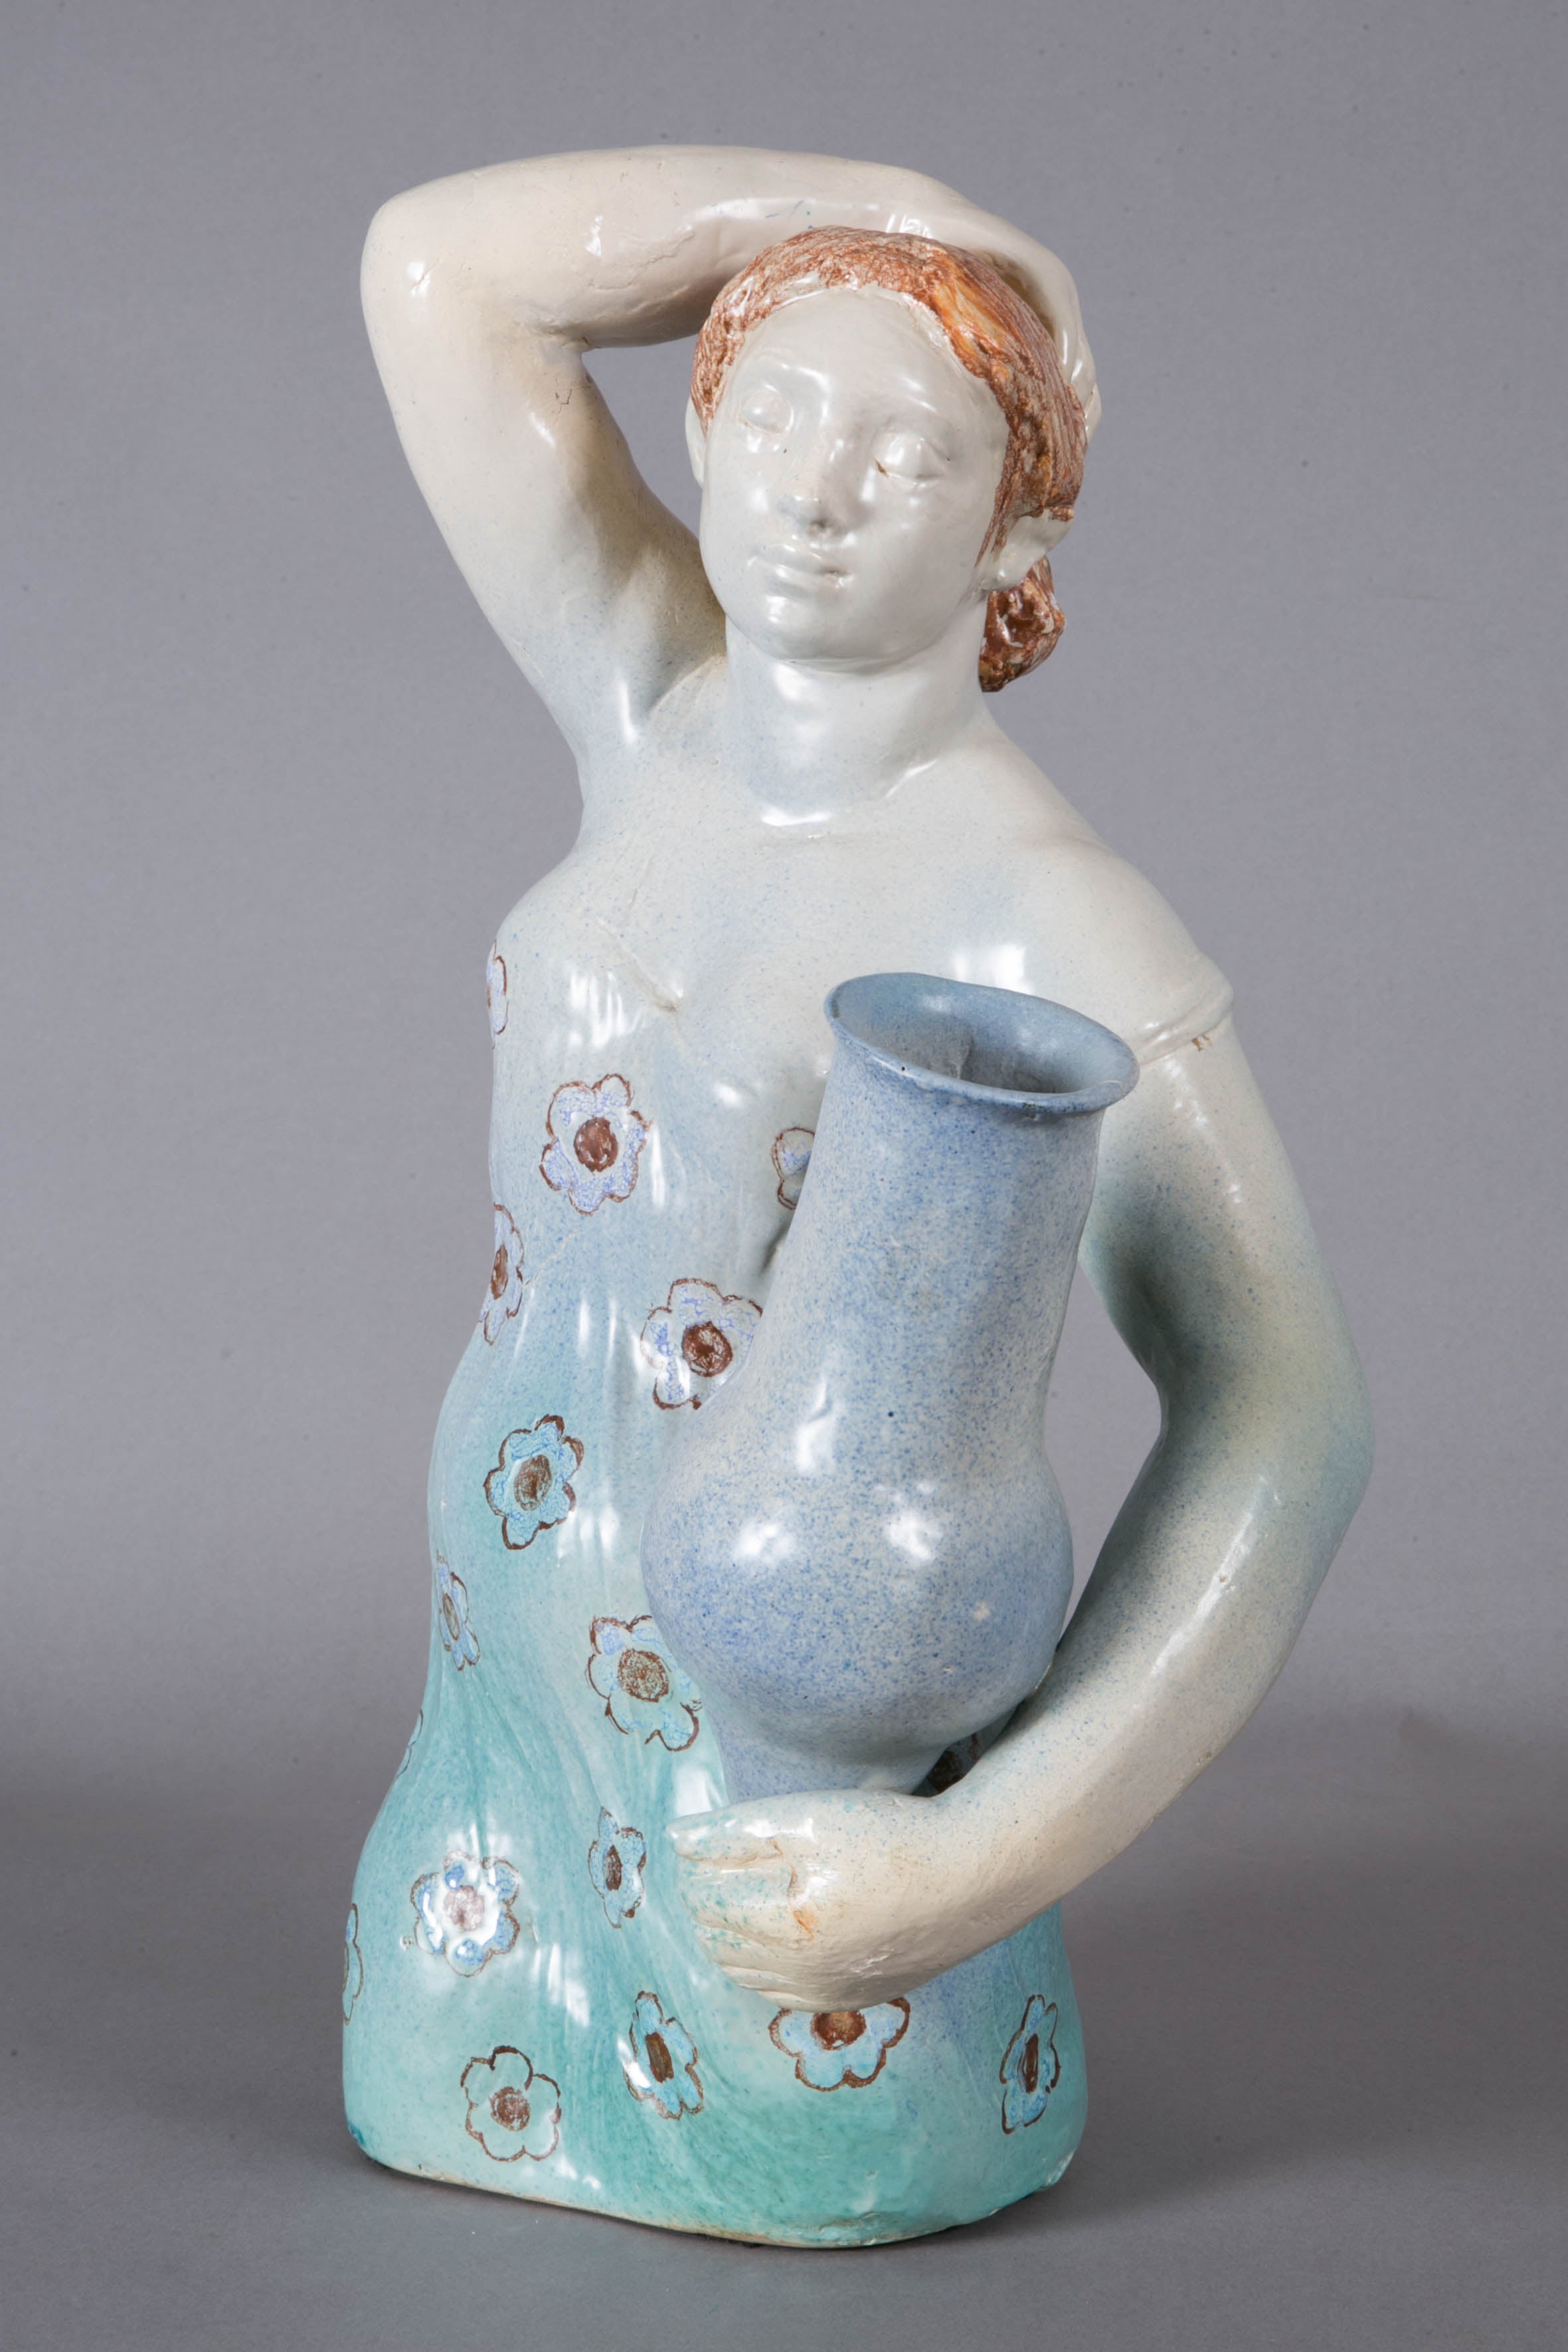 Important blue enameled ceramic sculpted woman by Odette LEPELTIER (1914-2006).
Bust of a woman holding a vase, with one arm on the head.
Signed. 

After studying painting and sculpture at the Paris Beaux-Arts school, and some time in the